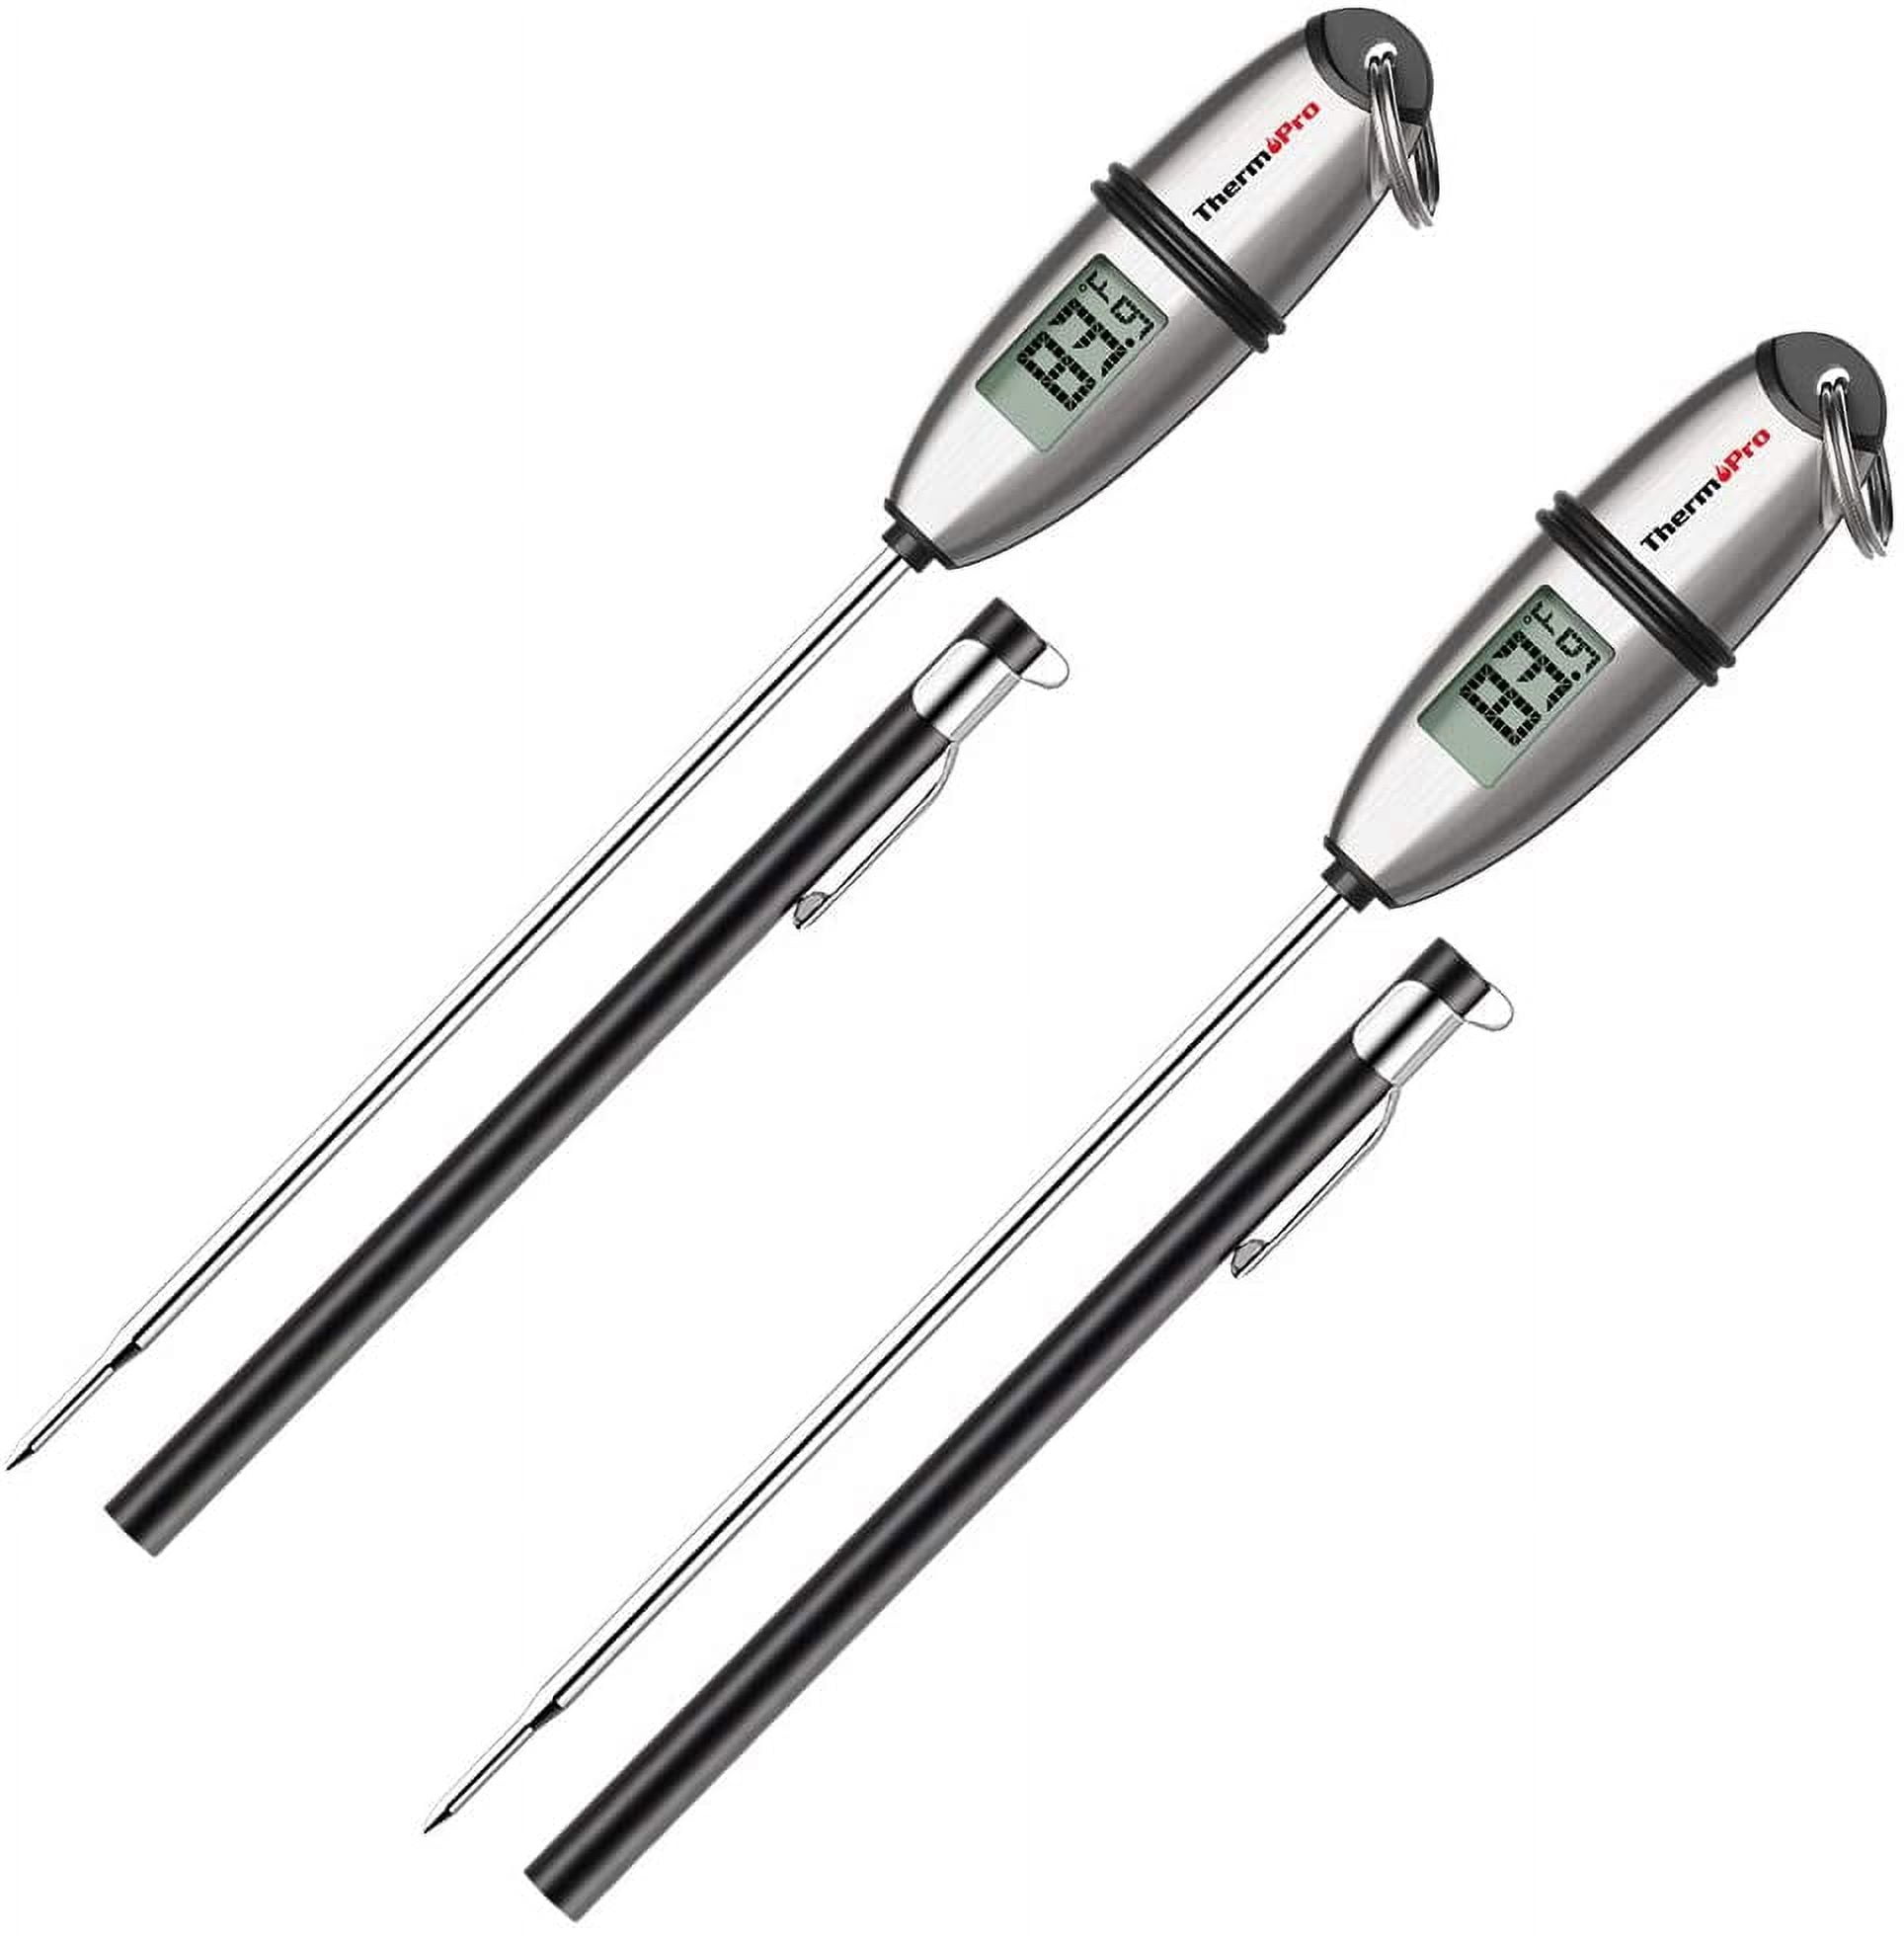  ThermoPro TP22S Digital Wireless Meat Thermometer for Grilling  with Dual Probe Food Cooking Thermometer for Smoker BBQ Grill Thermometer:  Home & Kitchen